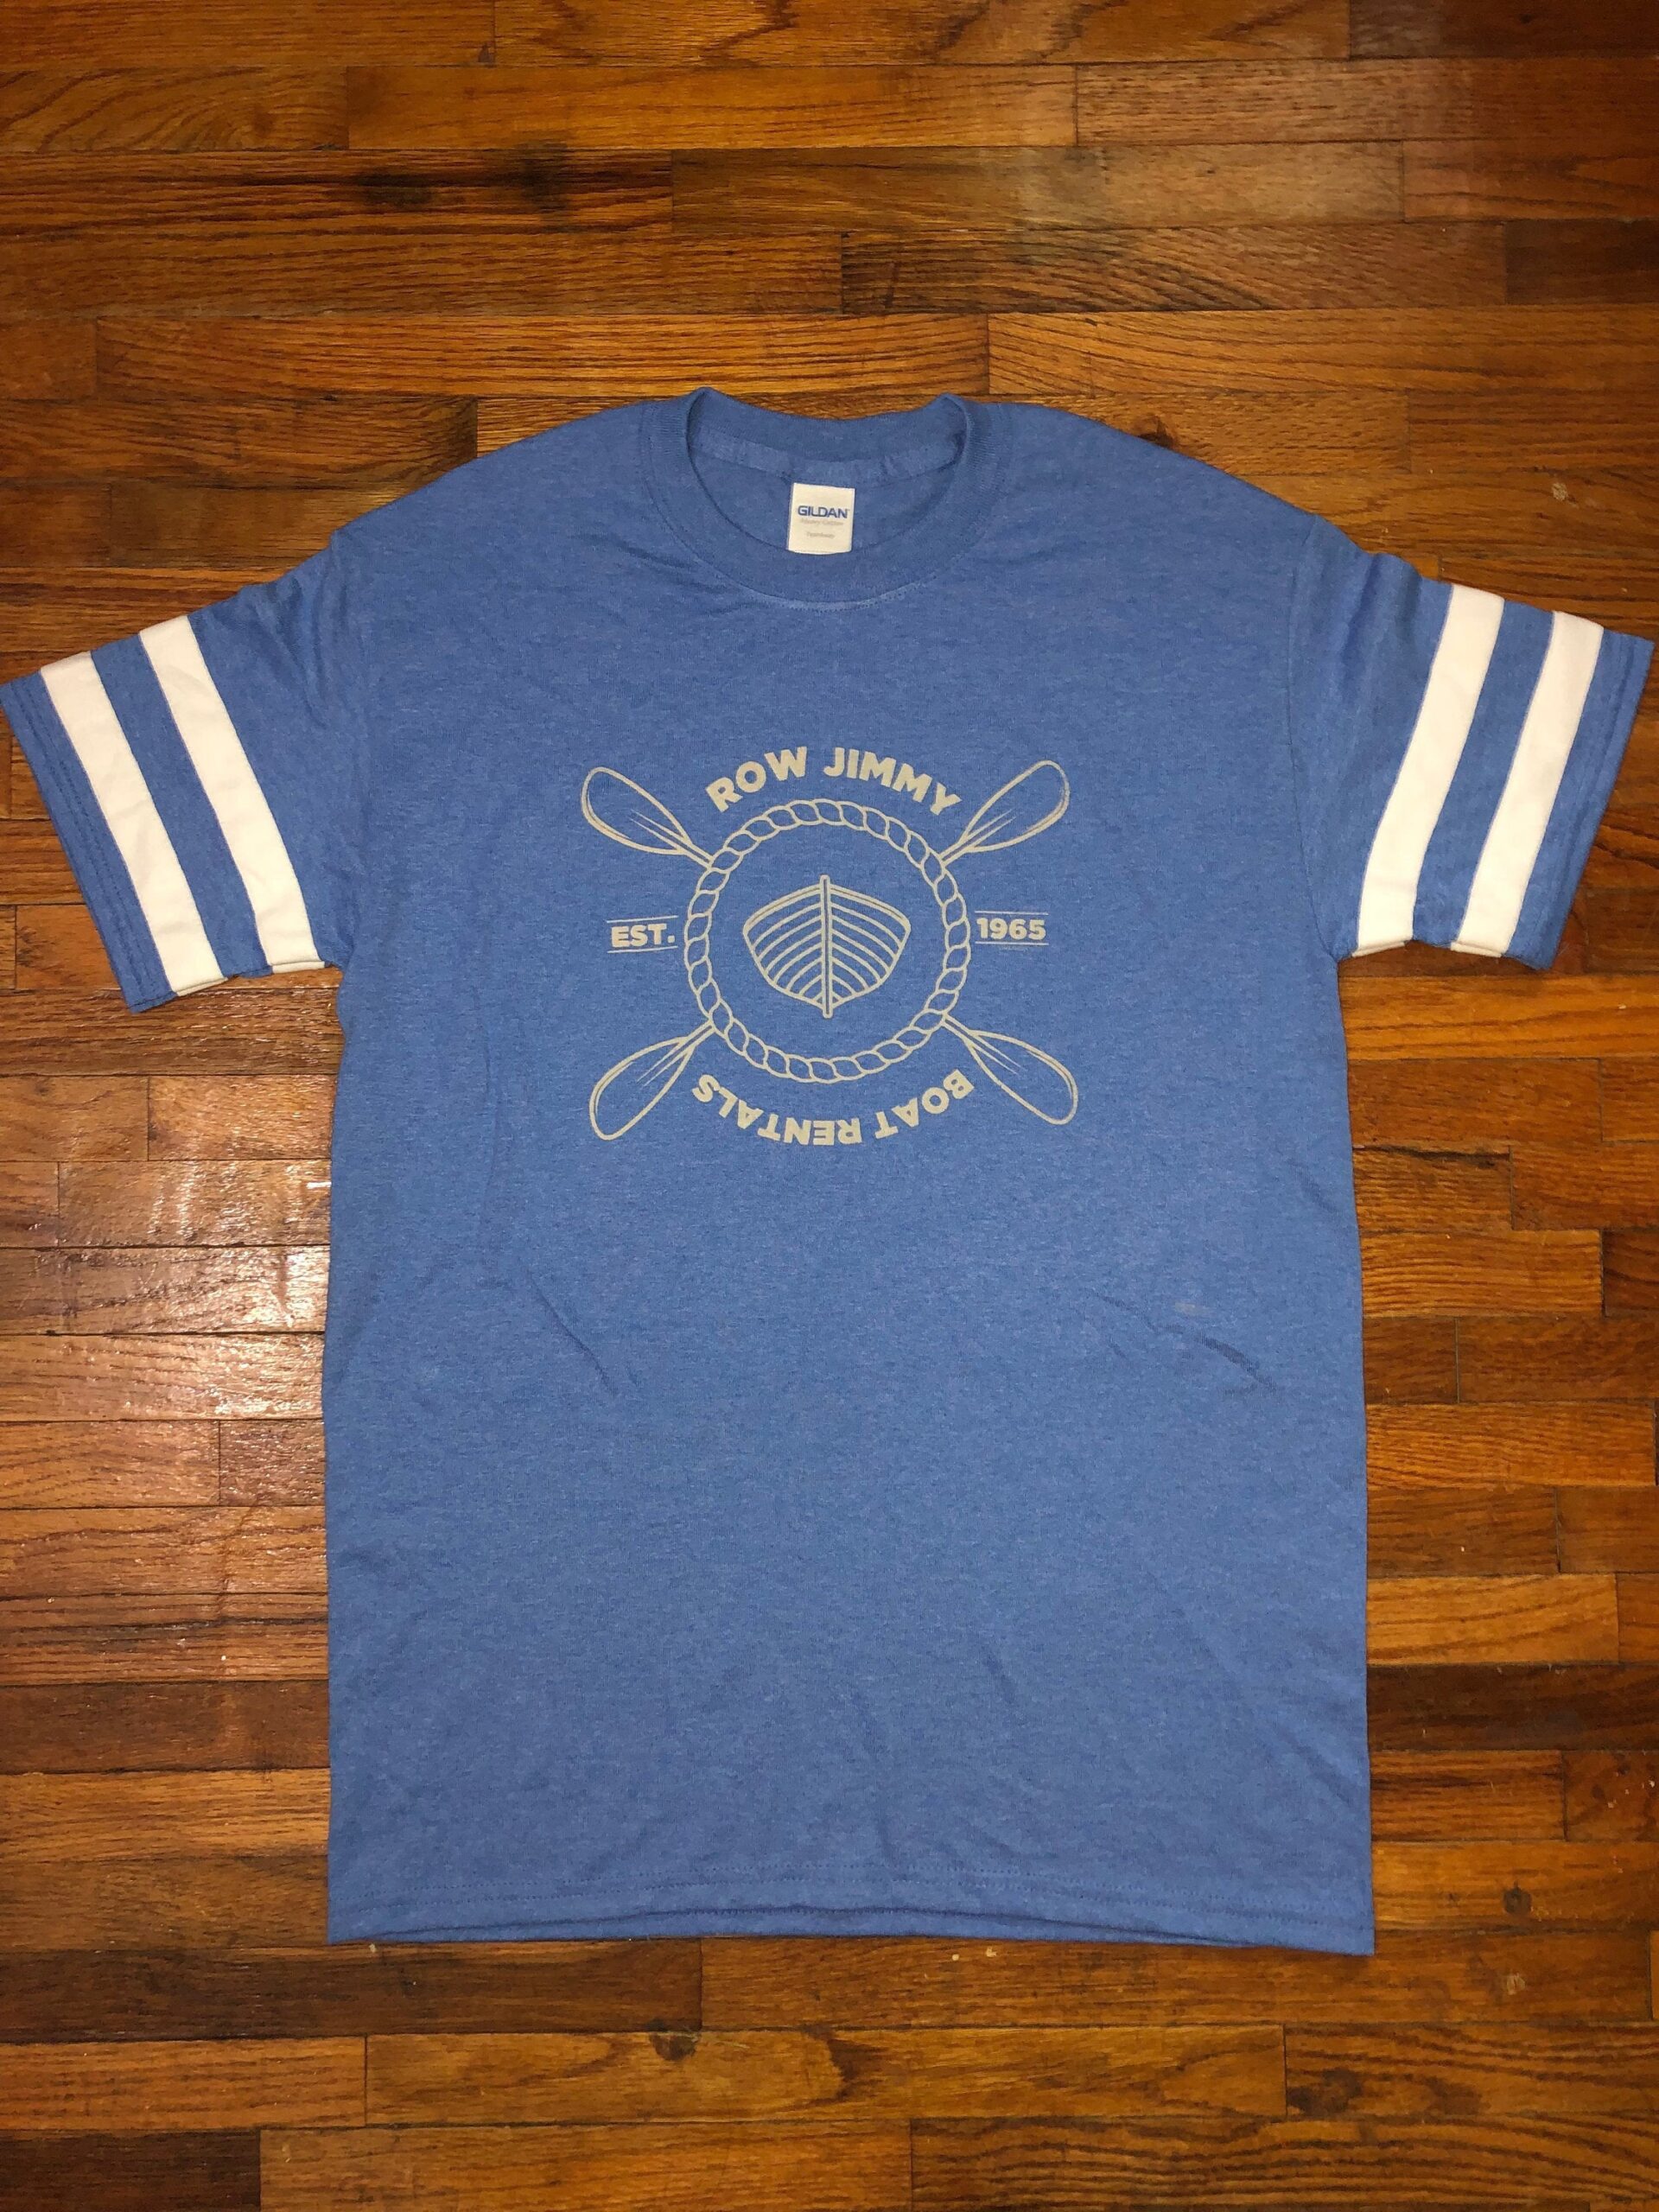 Row Jimmy Limited Edition triblend varsity t-shirt - Shakedown Designs